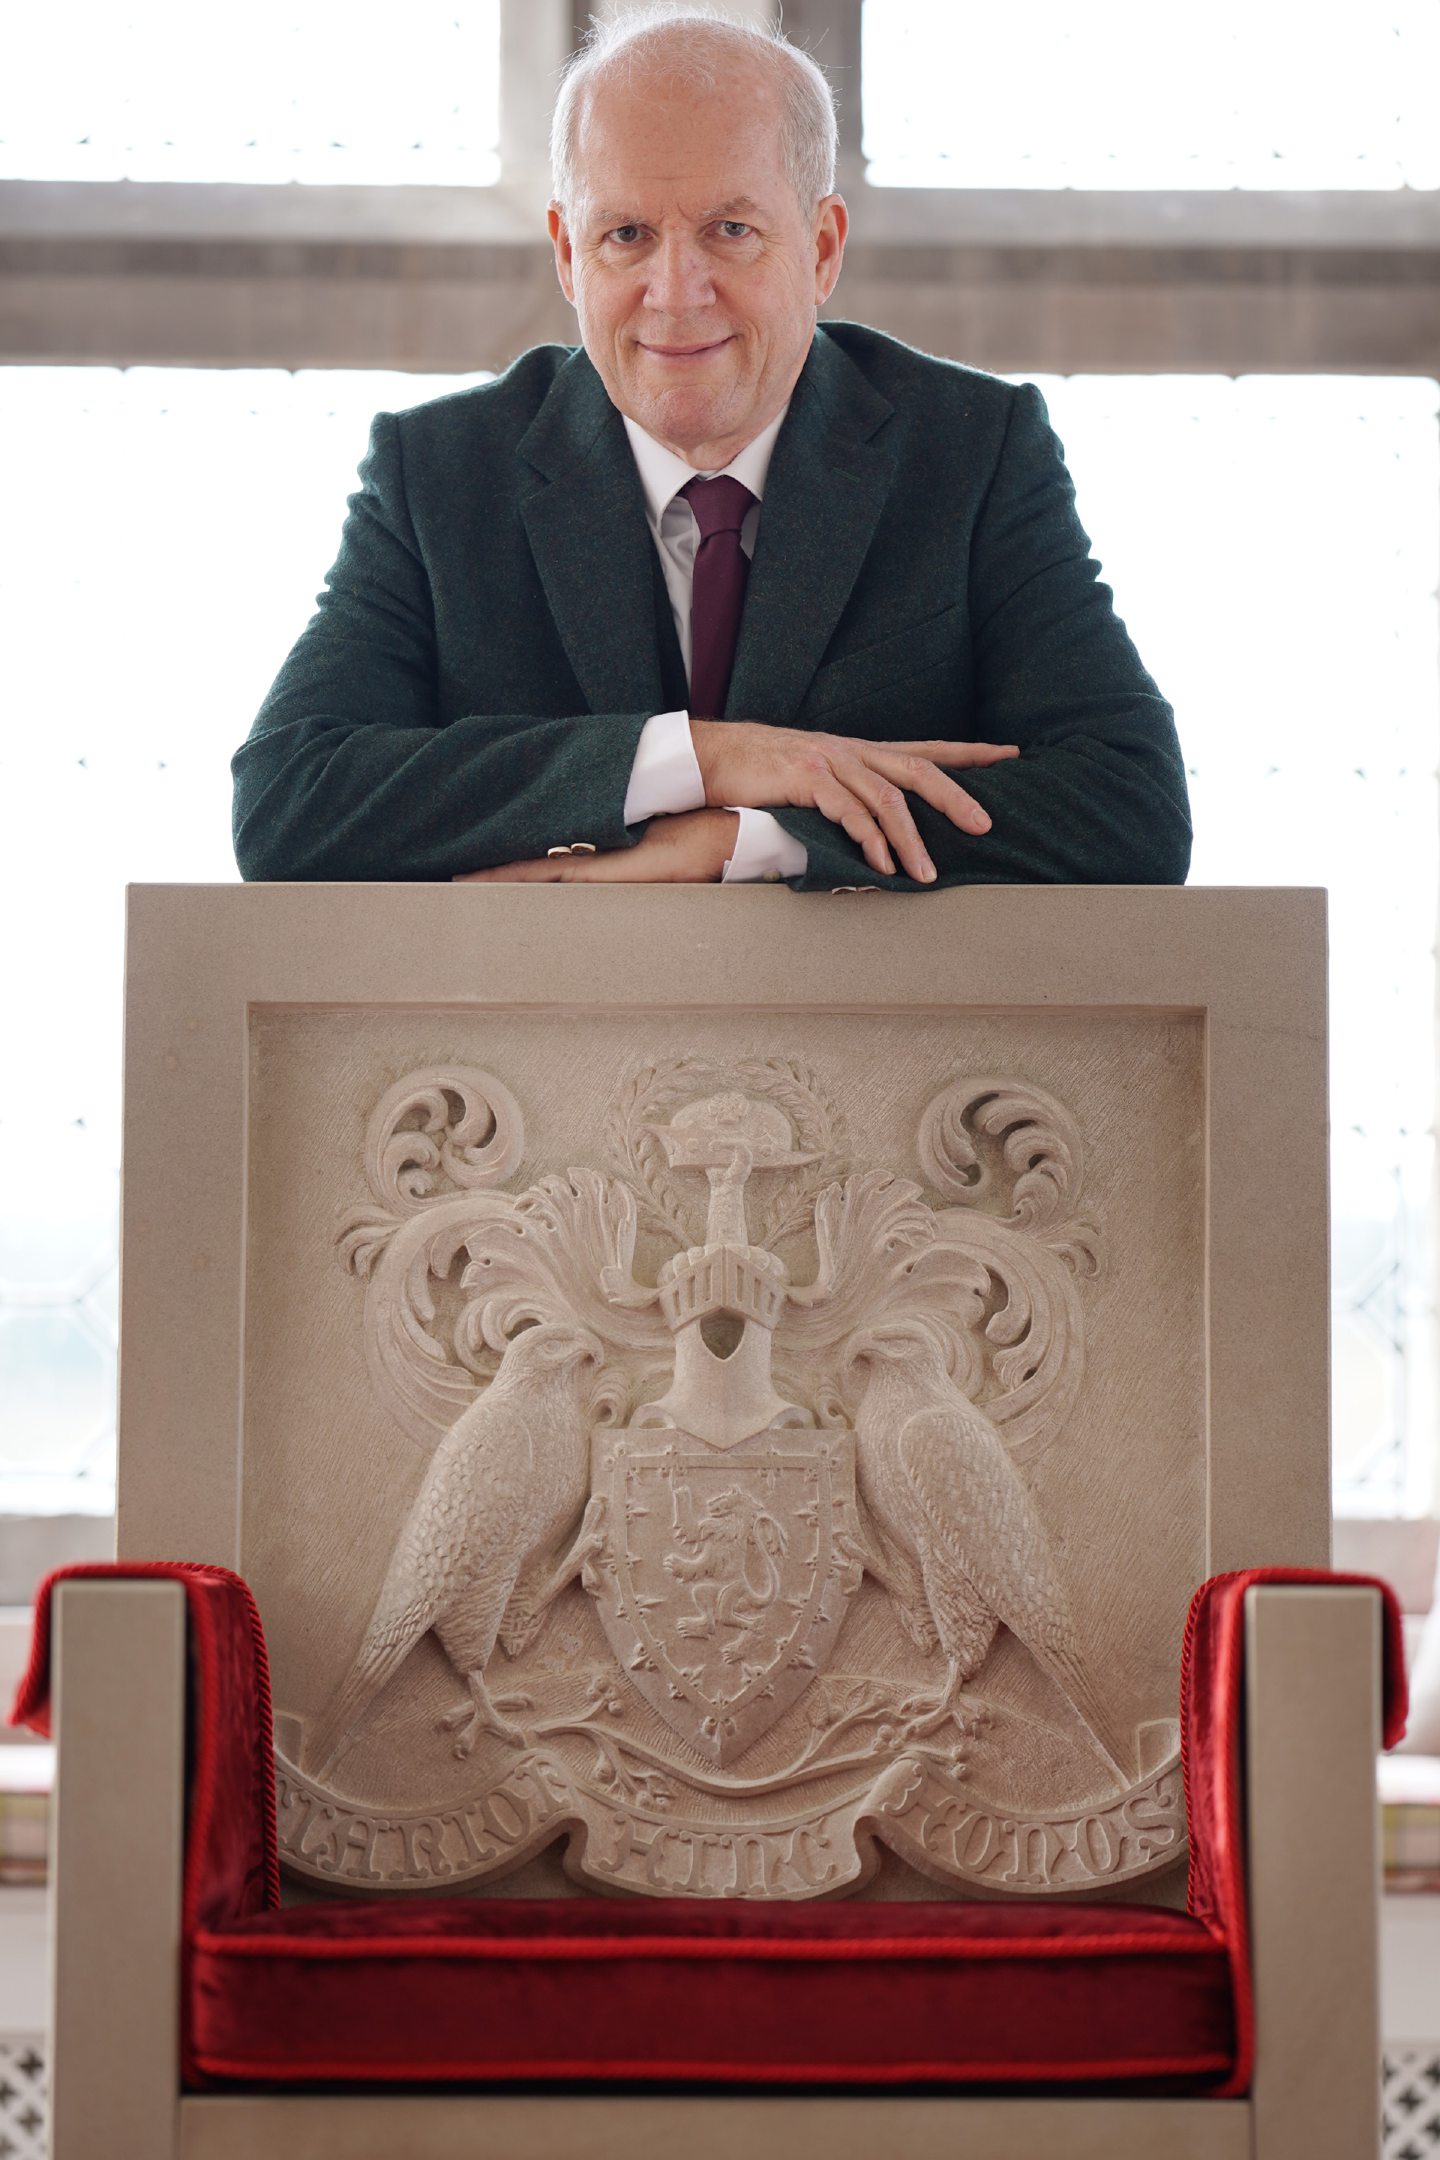 Mike Buchanan stands behind a throne. Image: Buchanan clan/Stewart Atwood Photography.